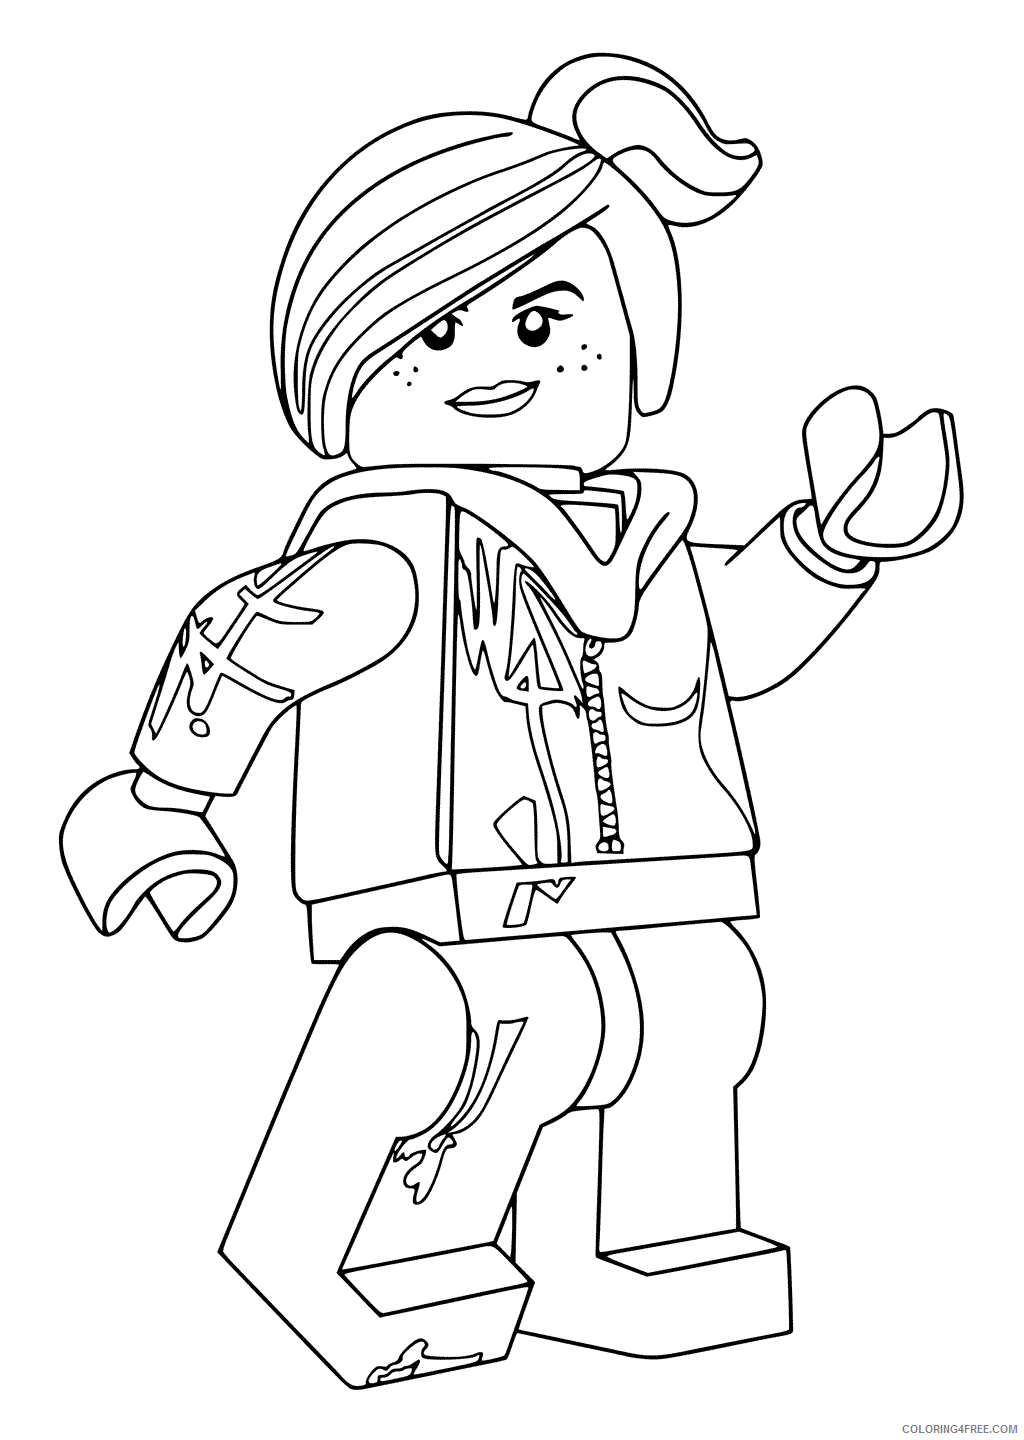 LEGO Coloring Pages Cartoons 1576918361_wyldstyle lego movie Printable 2020 3635 Coloring4free